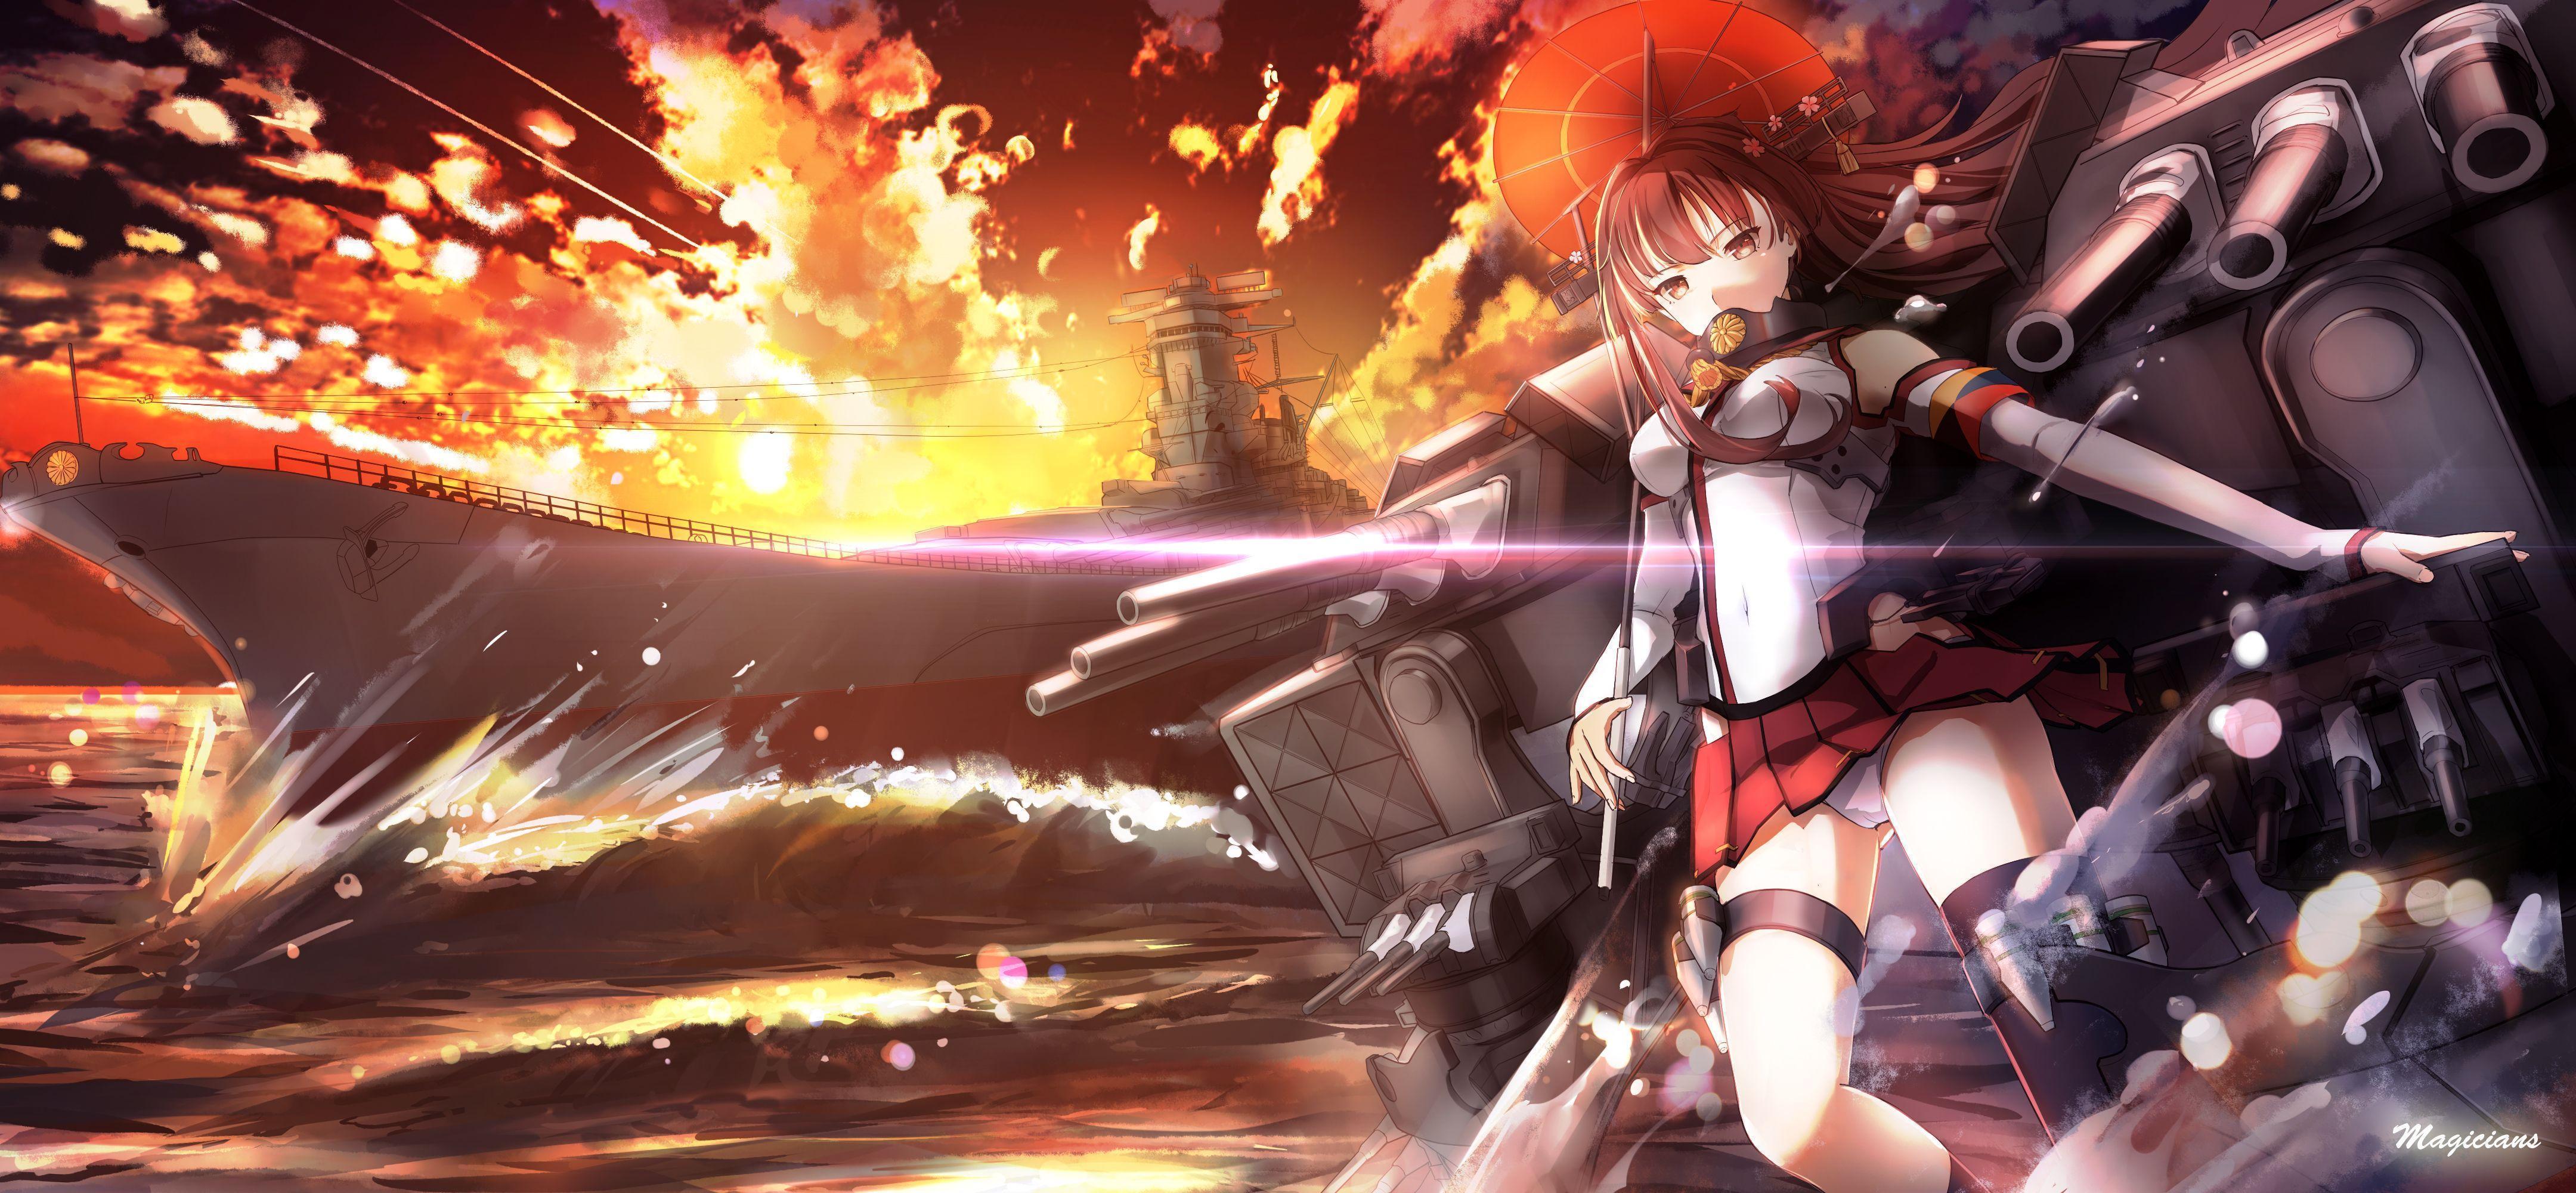 New Kantai Collection Kan Colle Anime Characters  Character Designs  Revealed  Otaku Tale